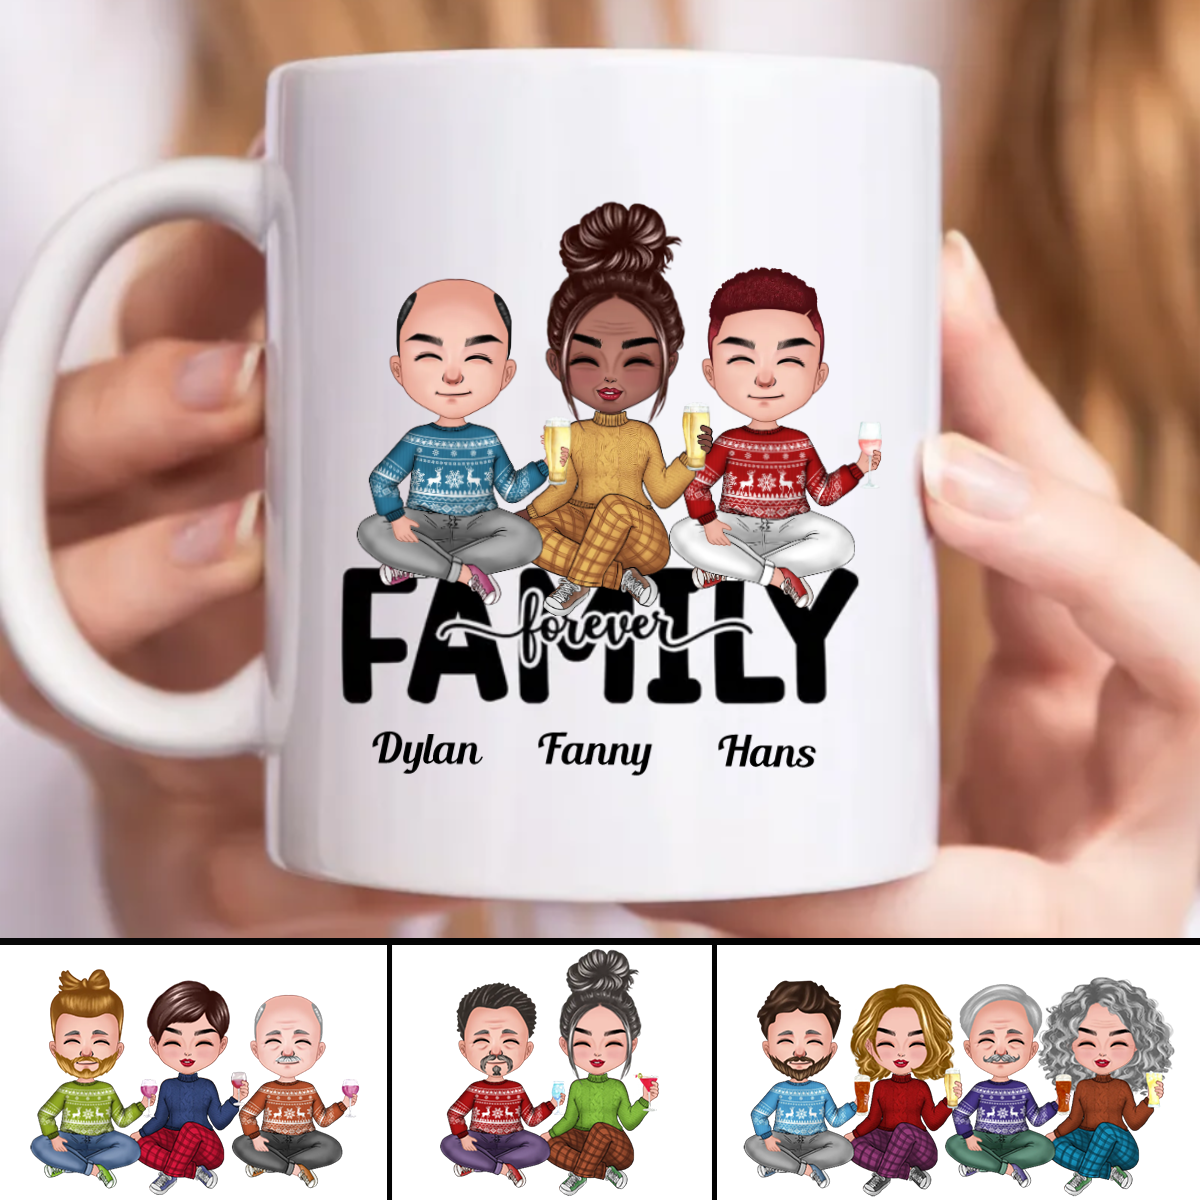 Discover Family - Family Forever - Personalized Mug